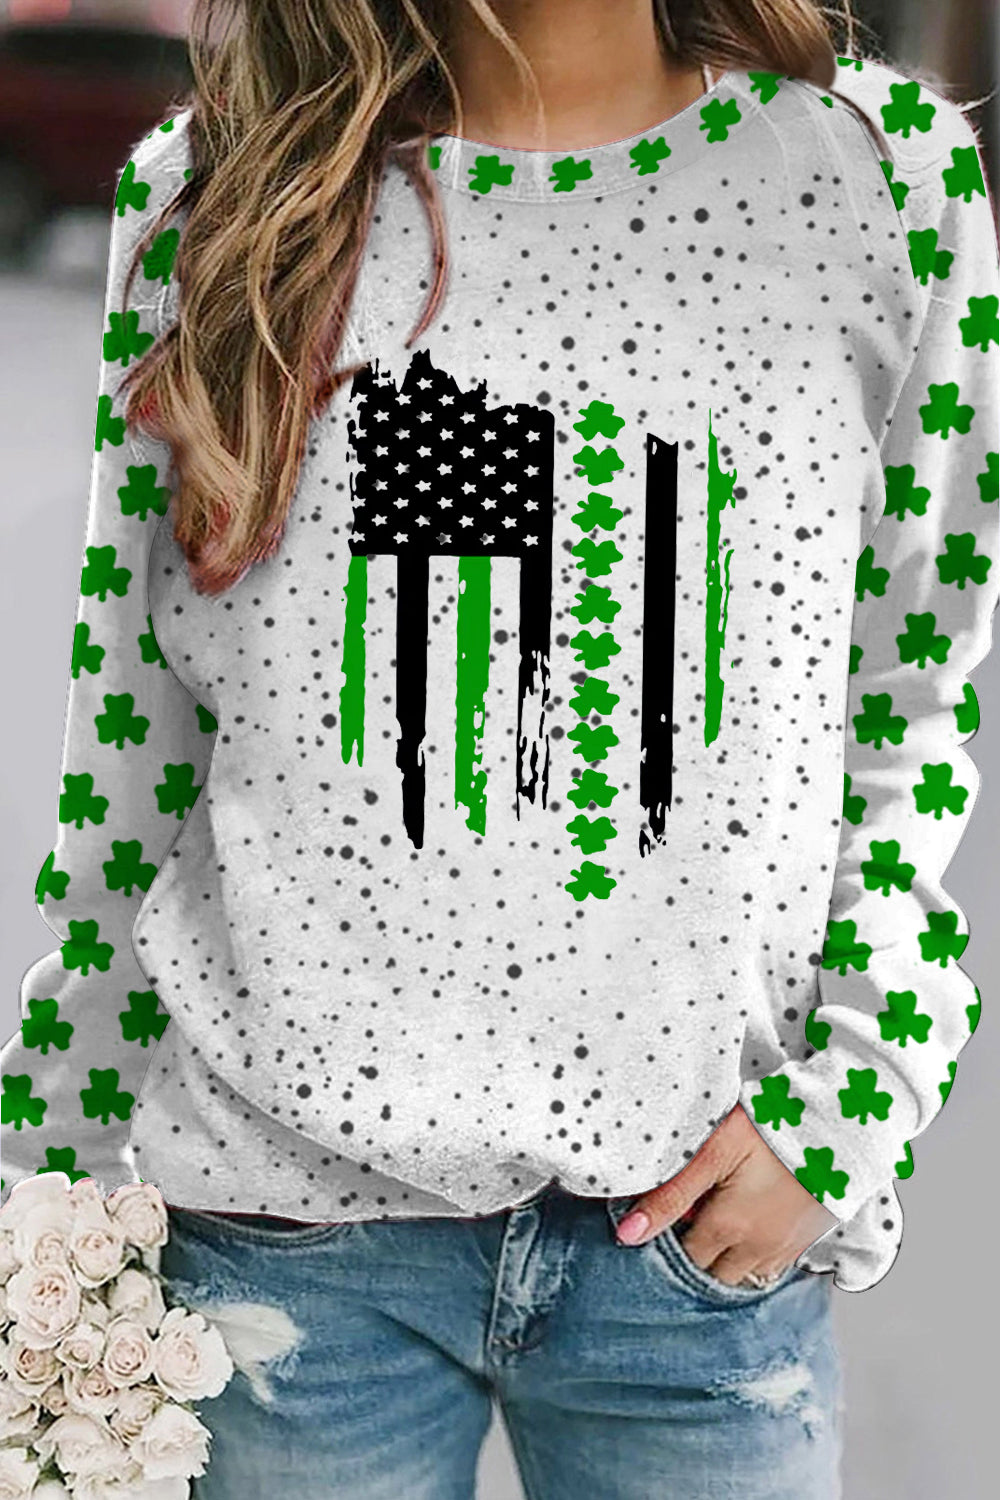 Textured Spotted Lucky Clover Striped Flag Sweatshirt